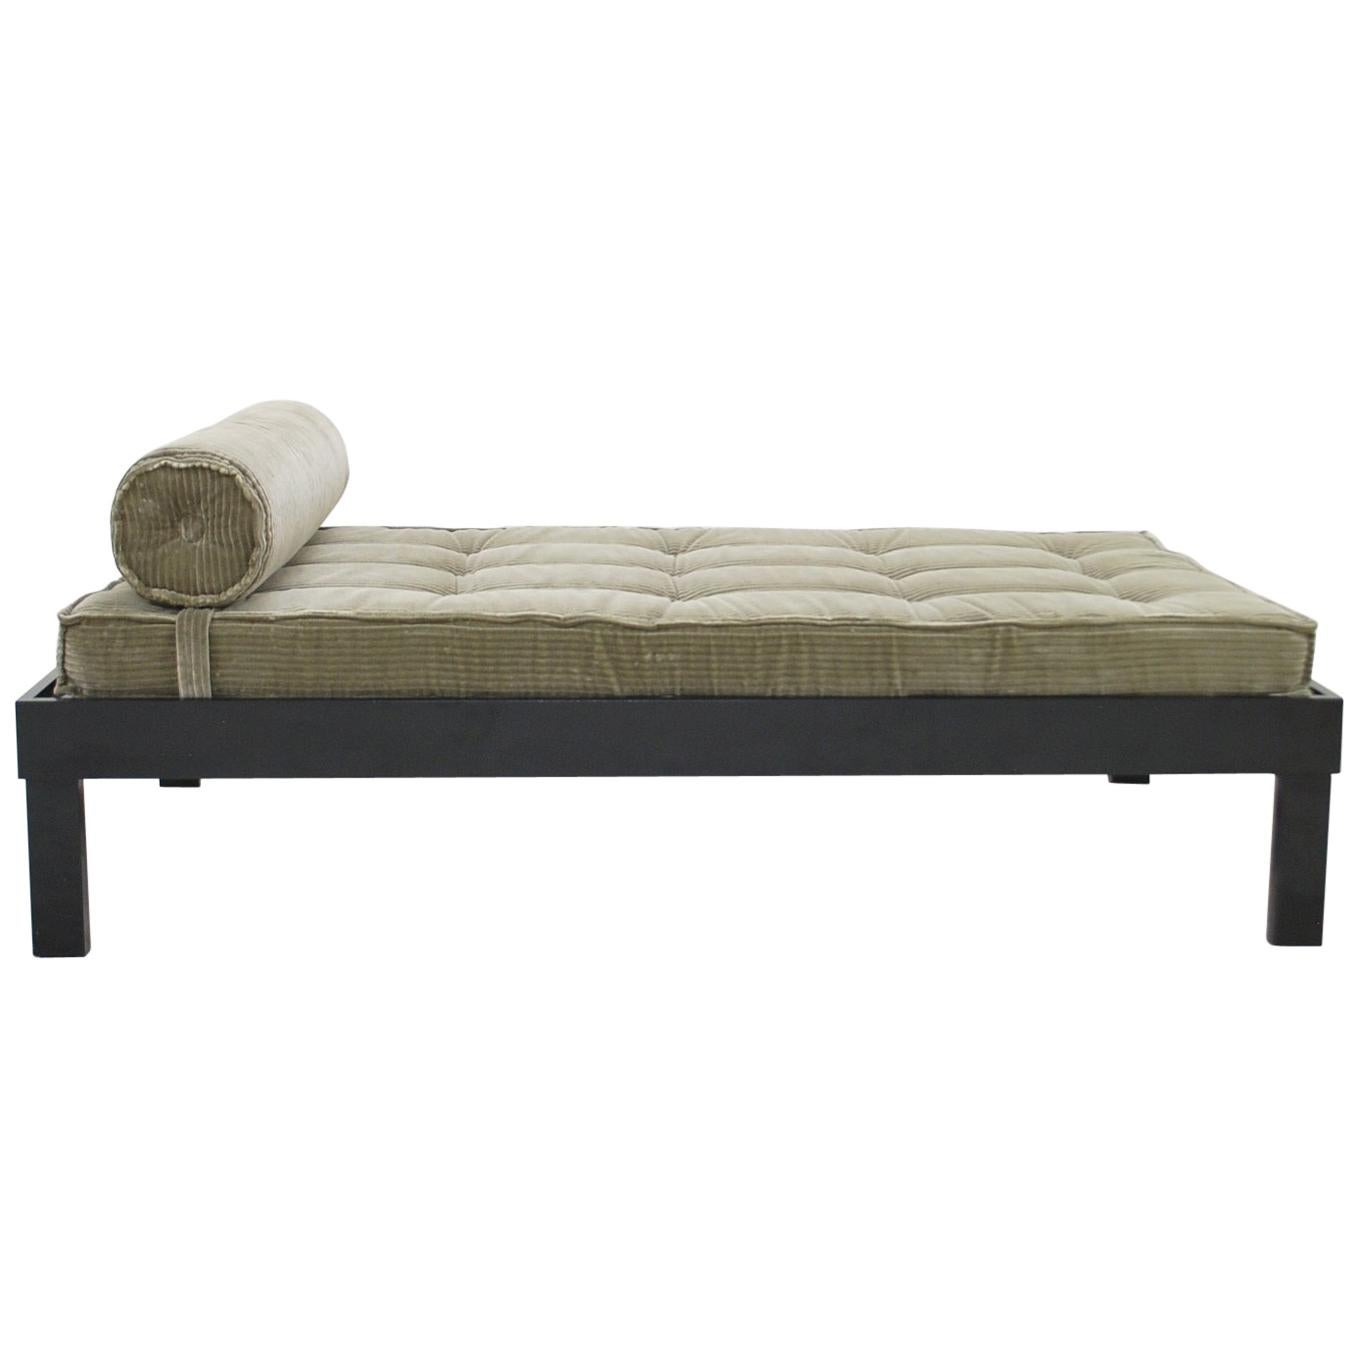 Modern Daybed Sofa by Burburry Prorsum